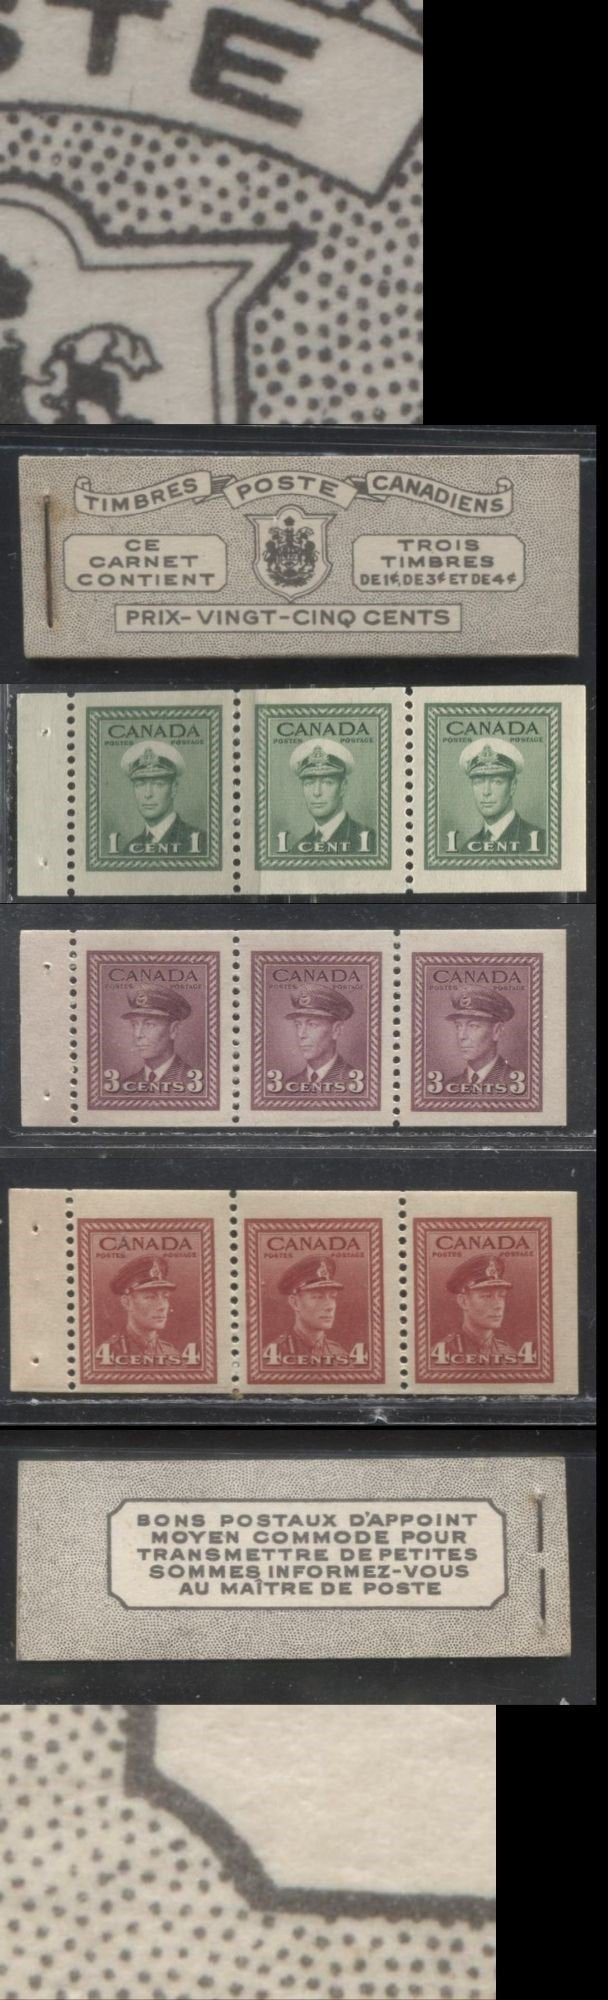 Lot 255 Canada #BK38a 1942-1949 War Issue Complete 25c, French Booklet Containing 1 Pane Each of 3 of 1c Green, 3c Rose-Purple and 4c Carmine Red, Harris Front Cover Type Vh , Back Cover Jvii, 7c & 6c Rate Page